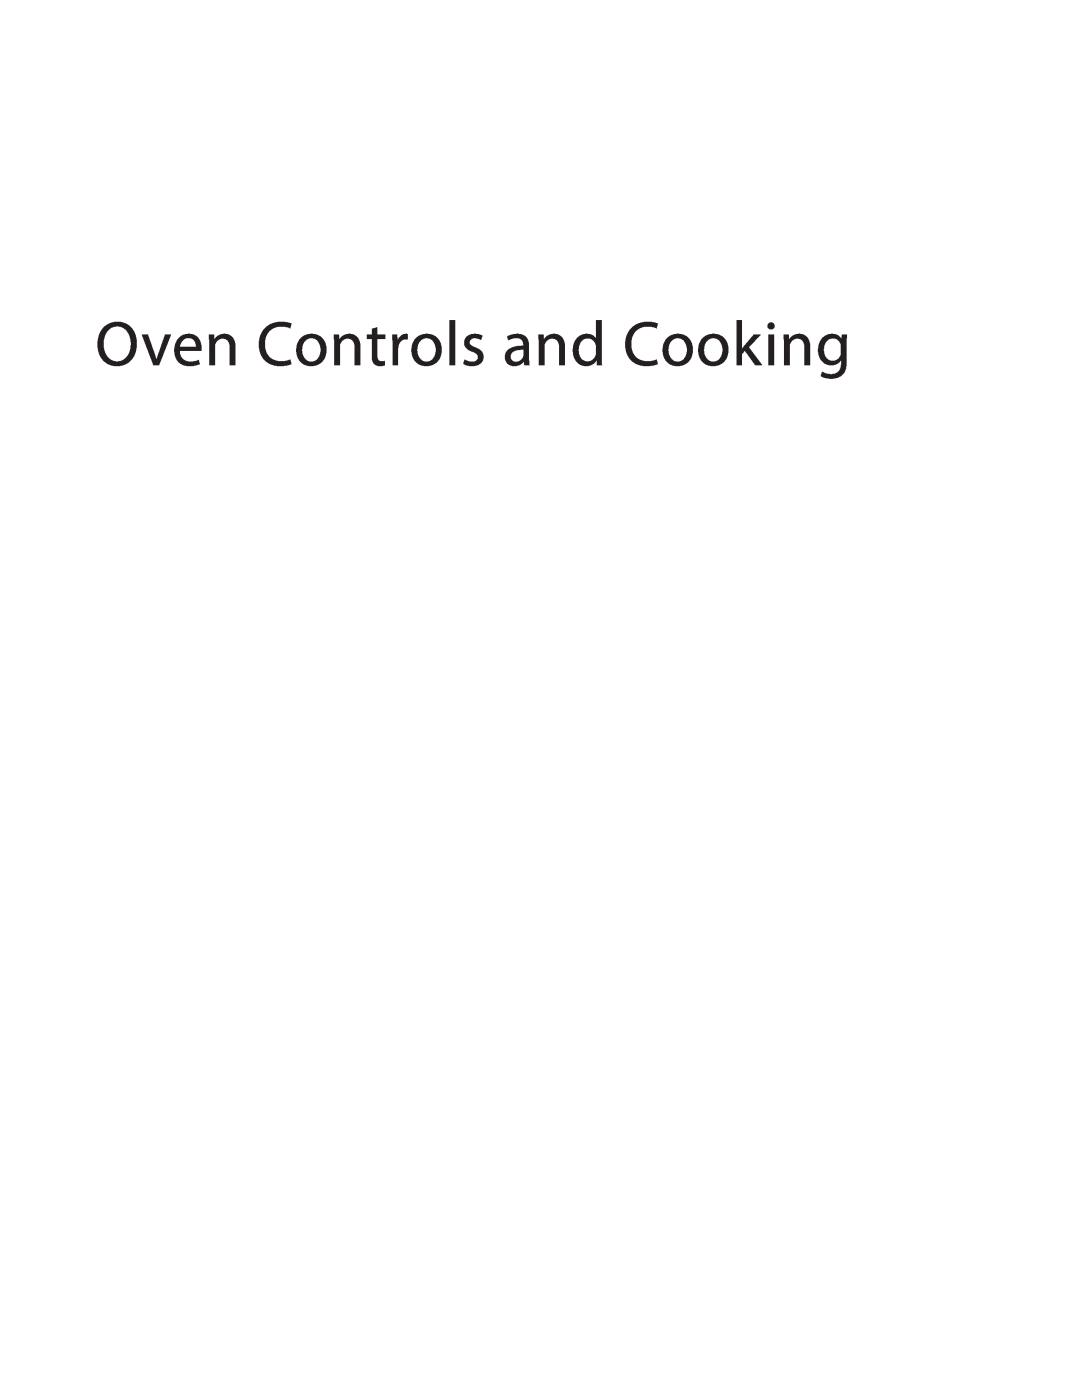 Turbo Chef Technologies i5 service manual Oven Controls and Cooking 